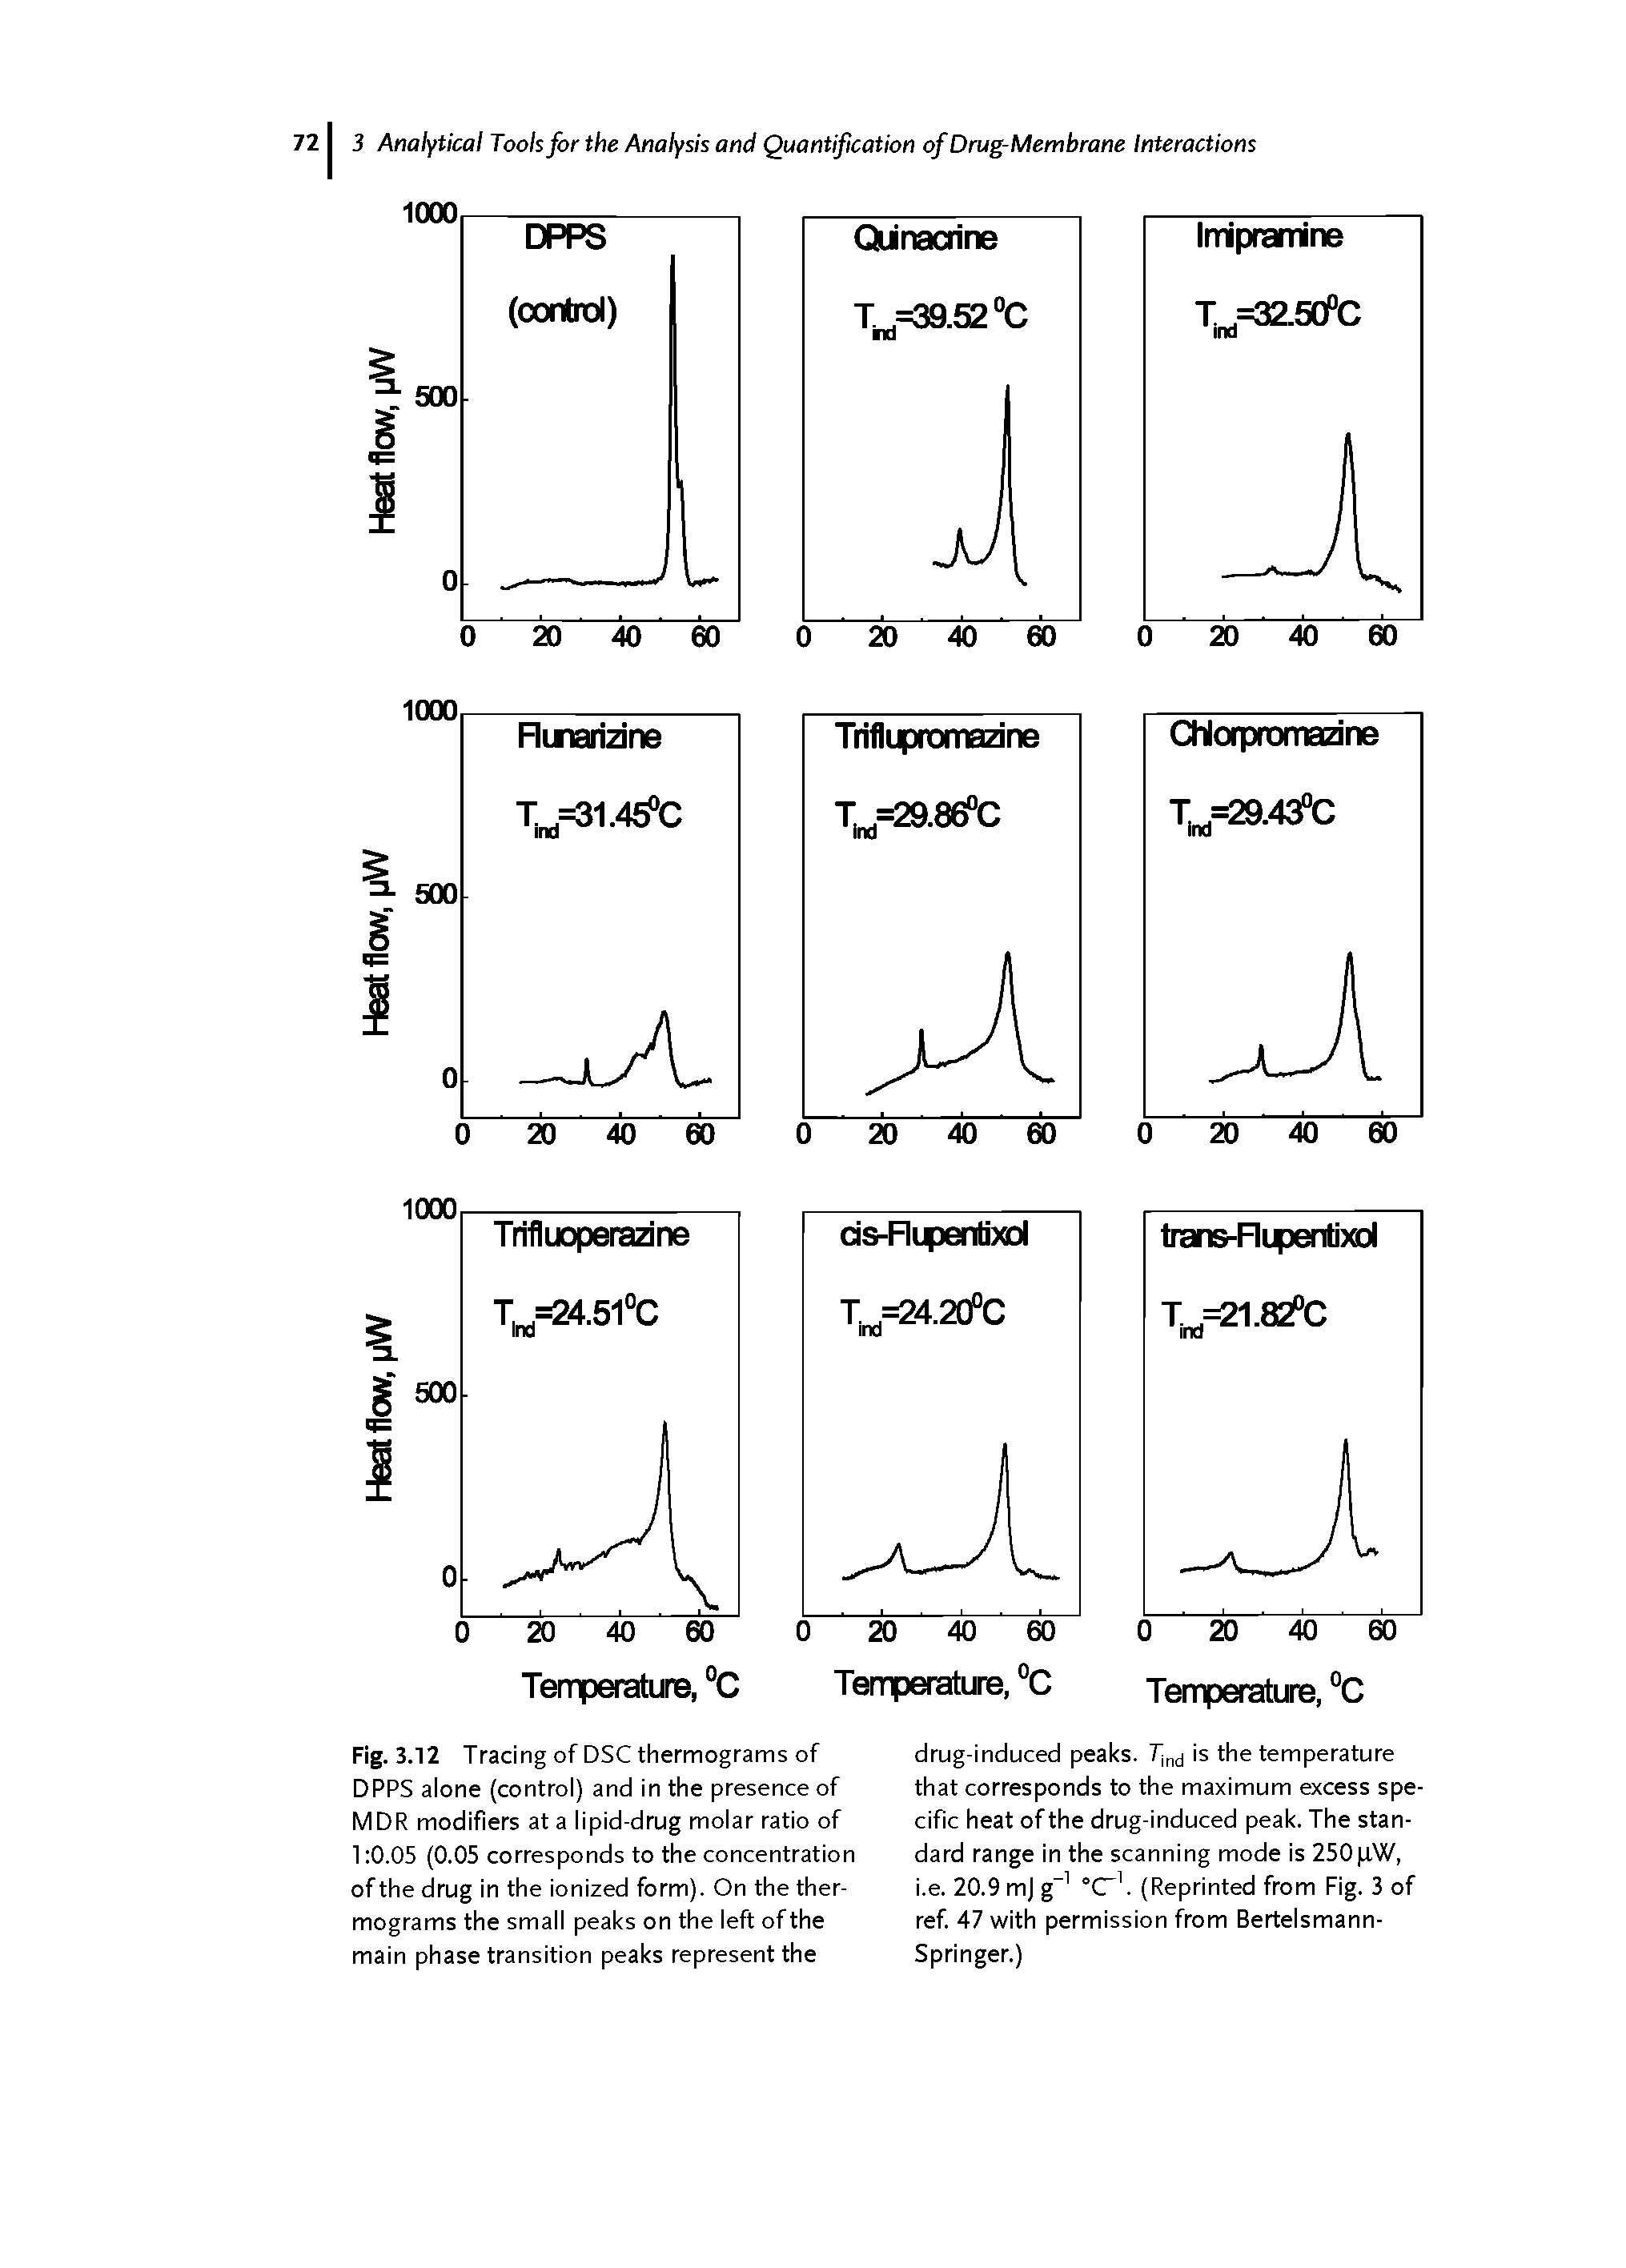 Fig. 3.12 Tracing of DSC thermograms of DPPS alone (control) and in the presence of MDR modifiers at a lipid-drug molar ratio of 1 0.05 (0.05 corresponds to the concentration of the drug in the ionized form). On the thermograms the small peaks on the left of the main phase transition peaks represent the...